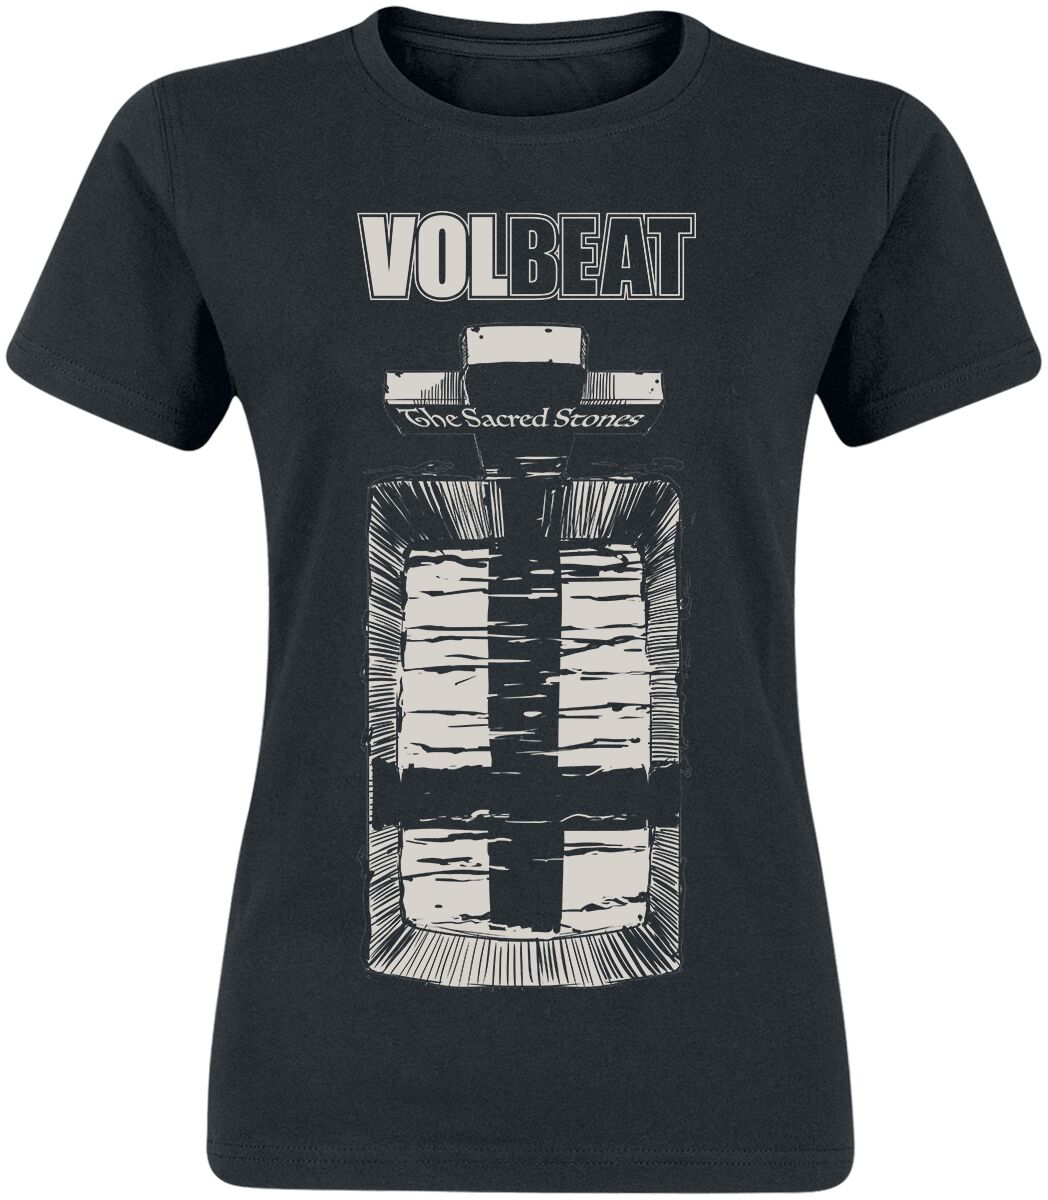 Volbeat The Scared Stones T-Shirt schwarz in M